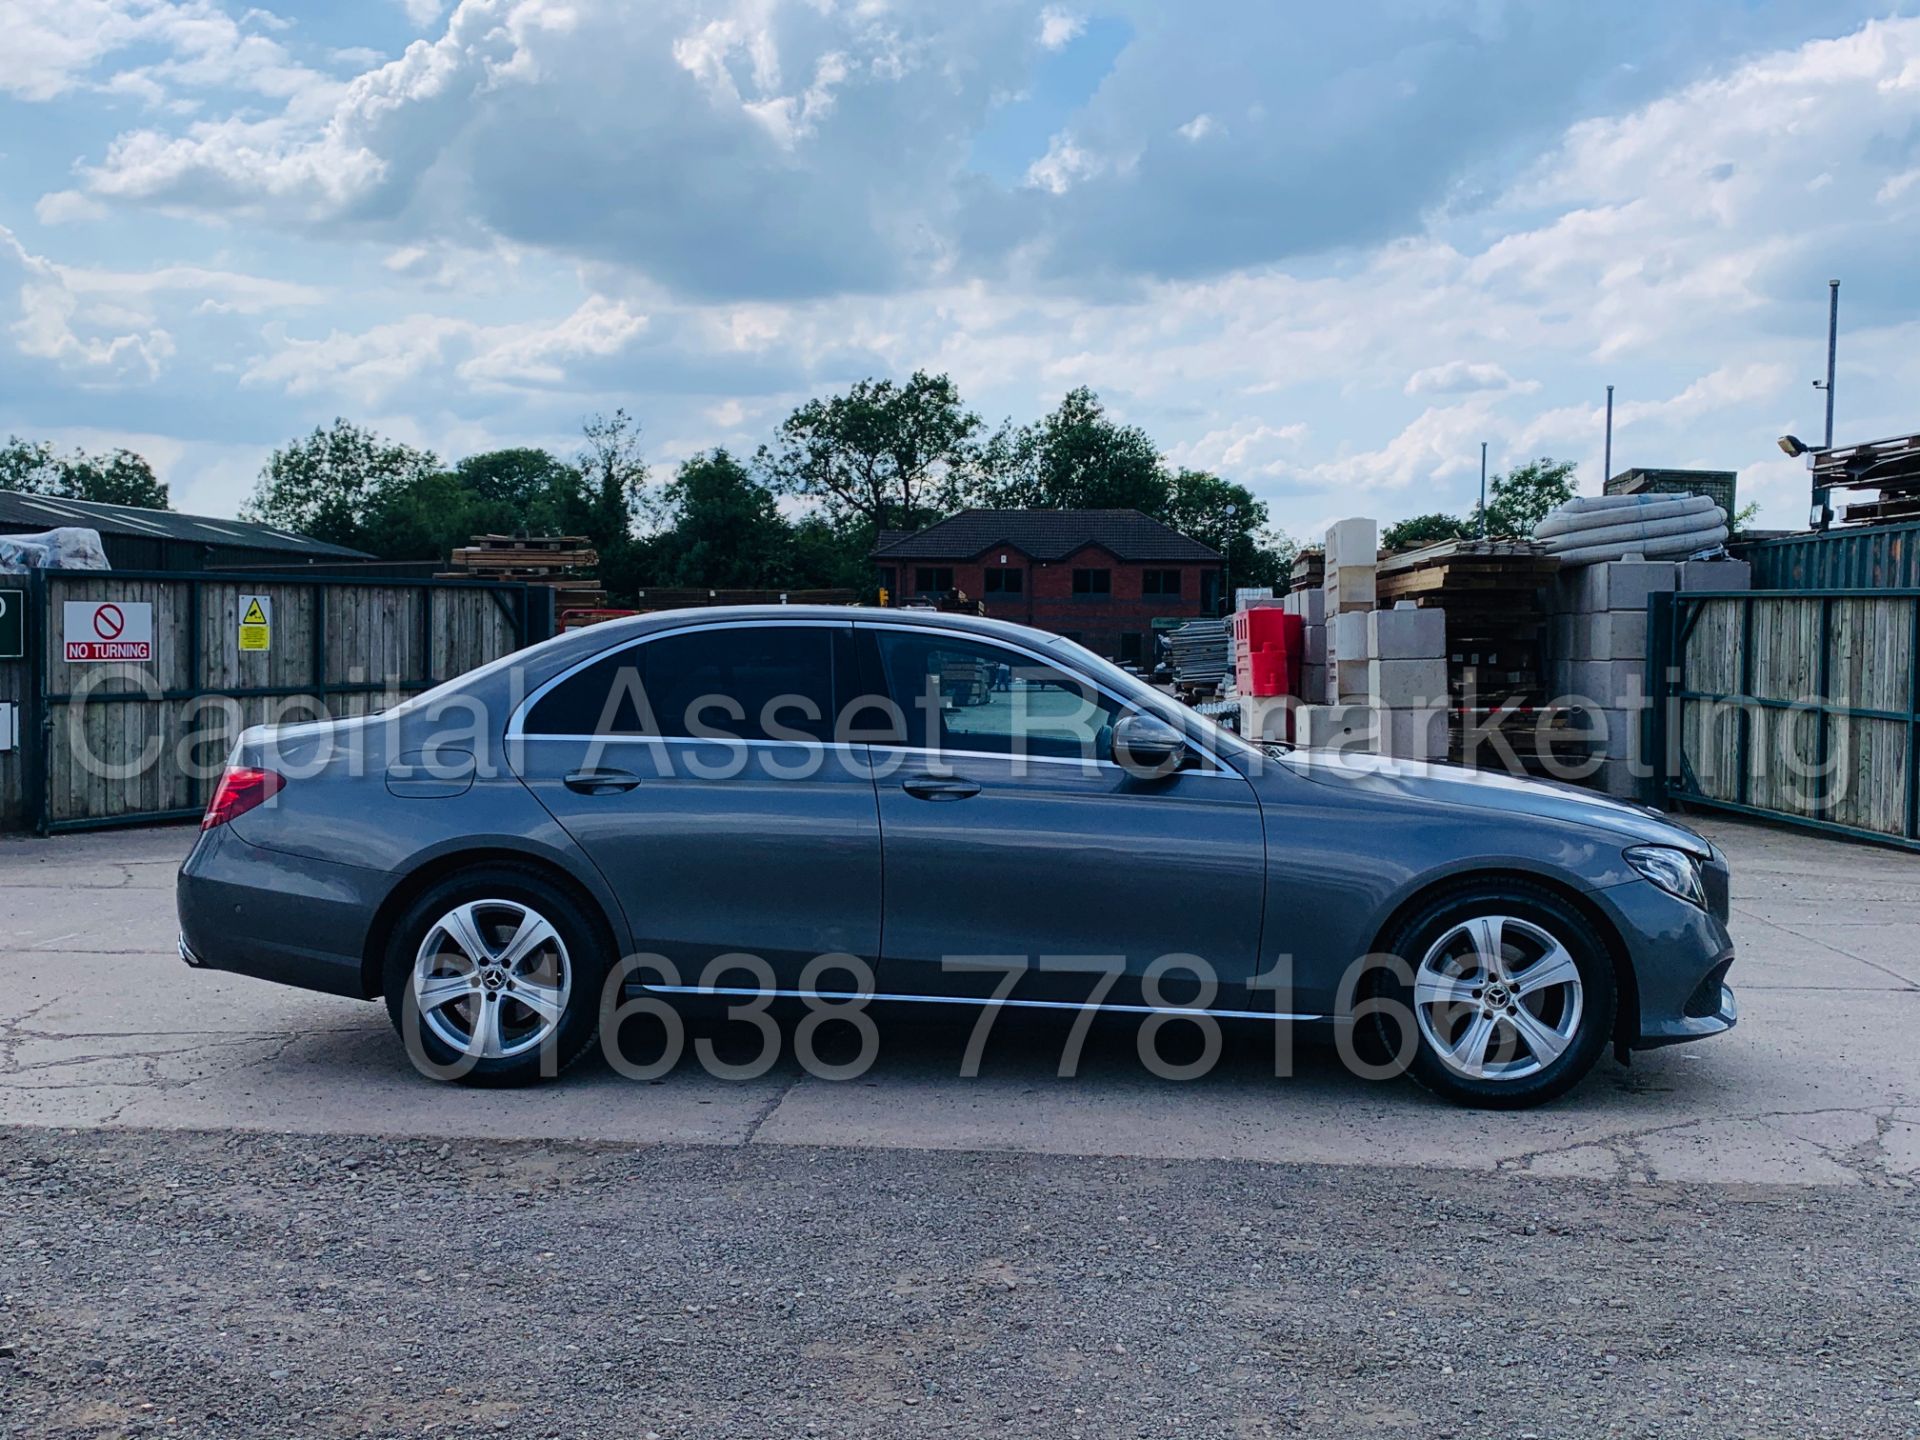 (On Sale) MERCEDES-BENZ E220d *SALOON* (2018 - NEW MODEL) '9G TRONIC AUTO - LEATHER - SAT NAV' - Image 13 of 50